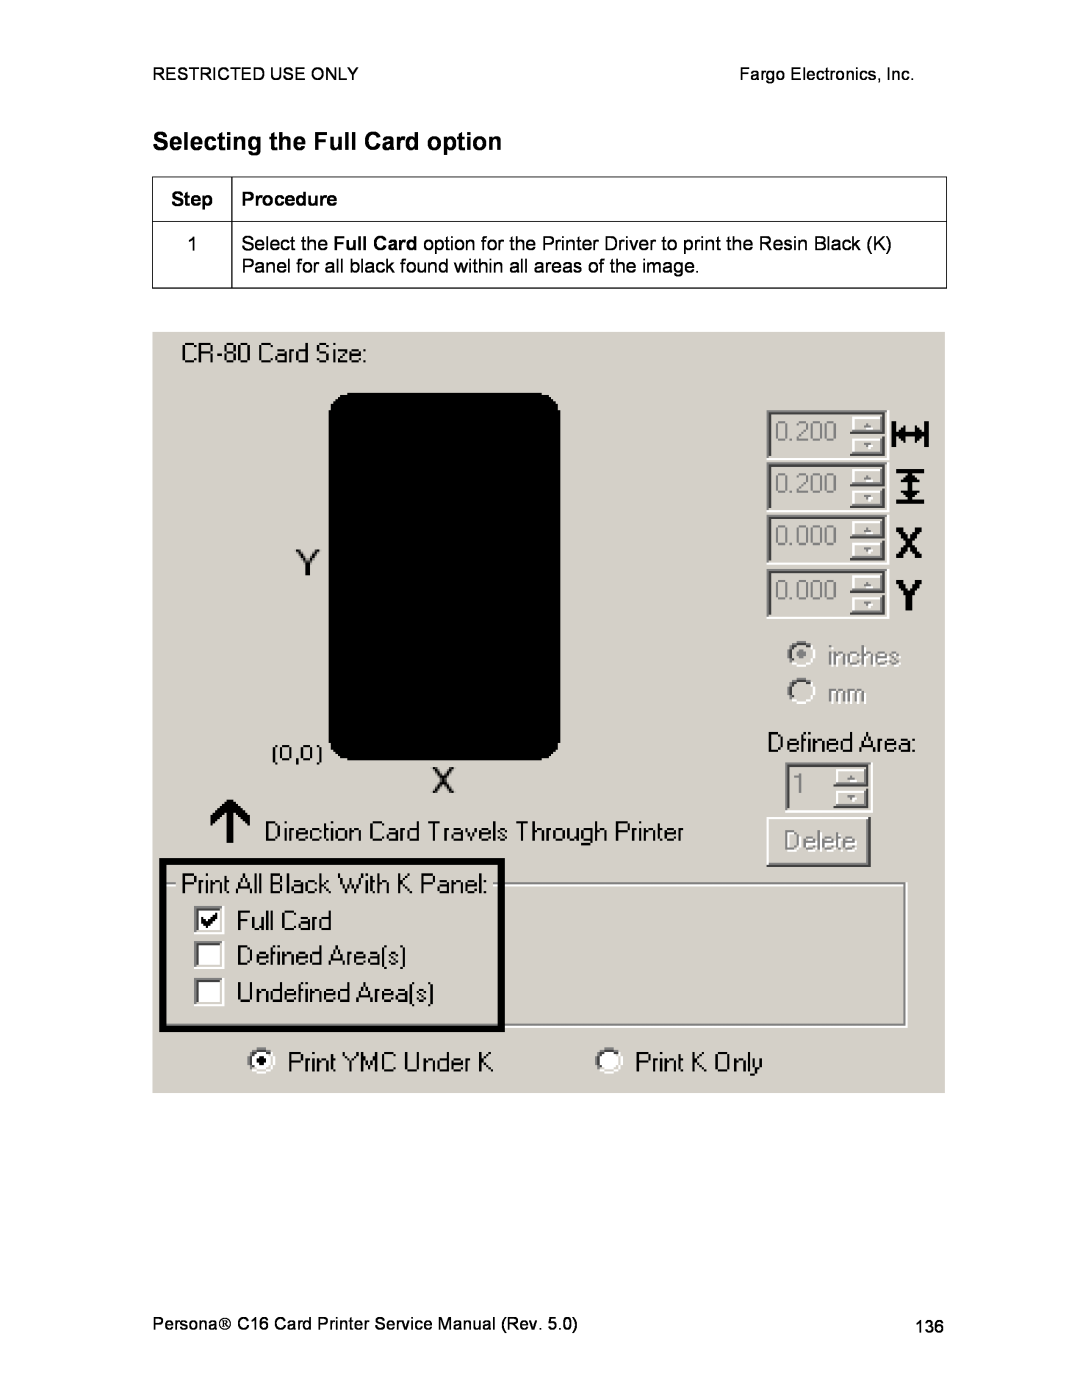 FARGO electronic C16 service manual Selecting the Full Card option 